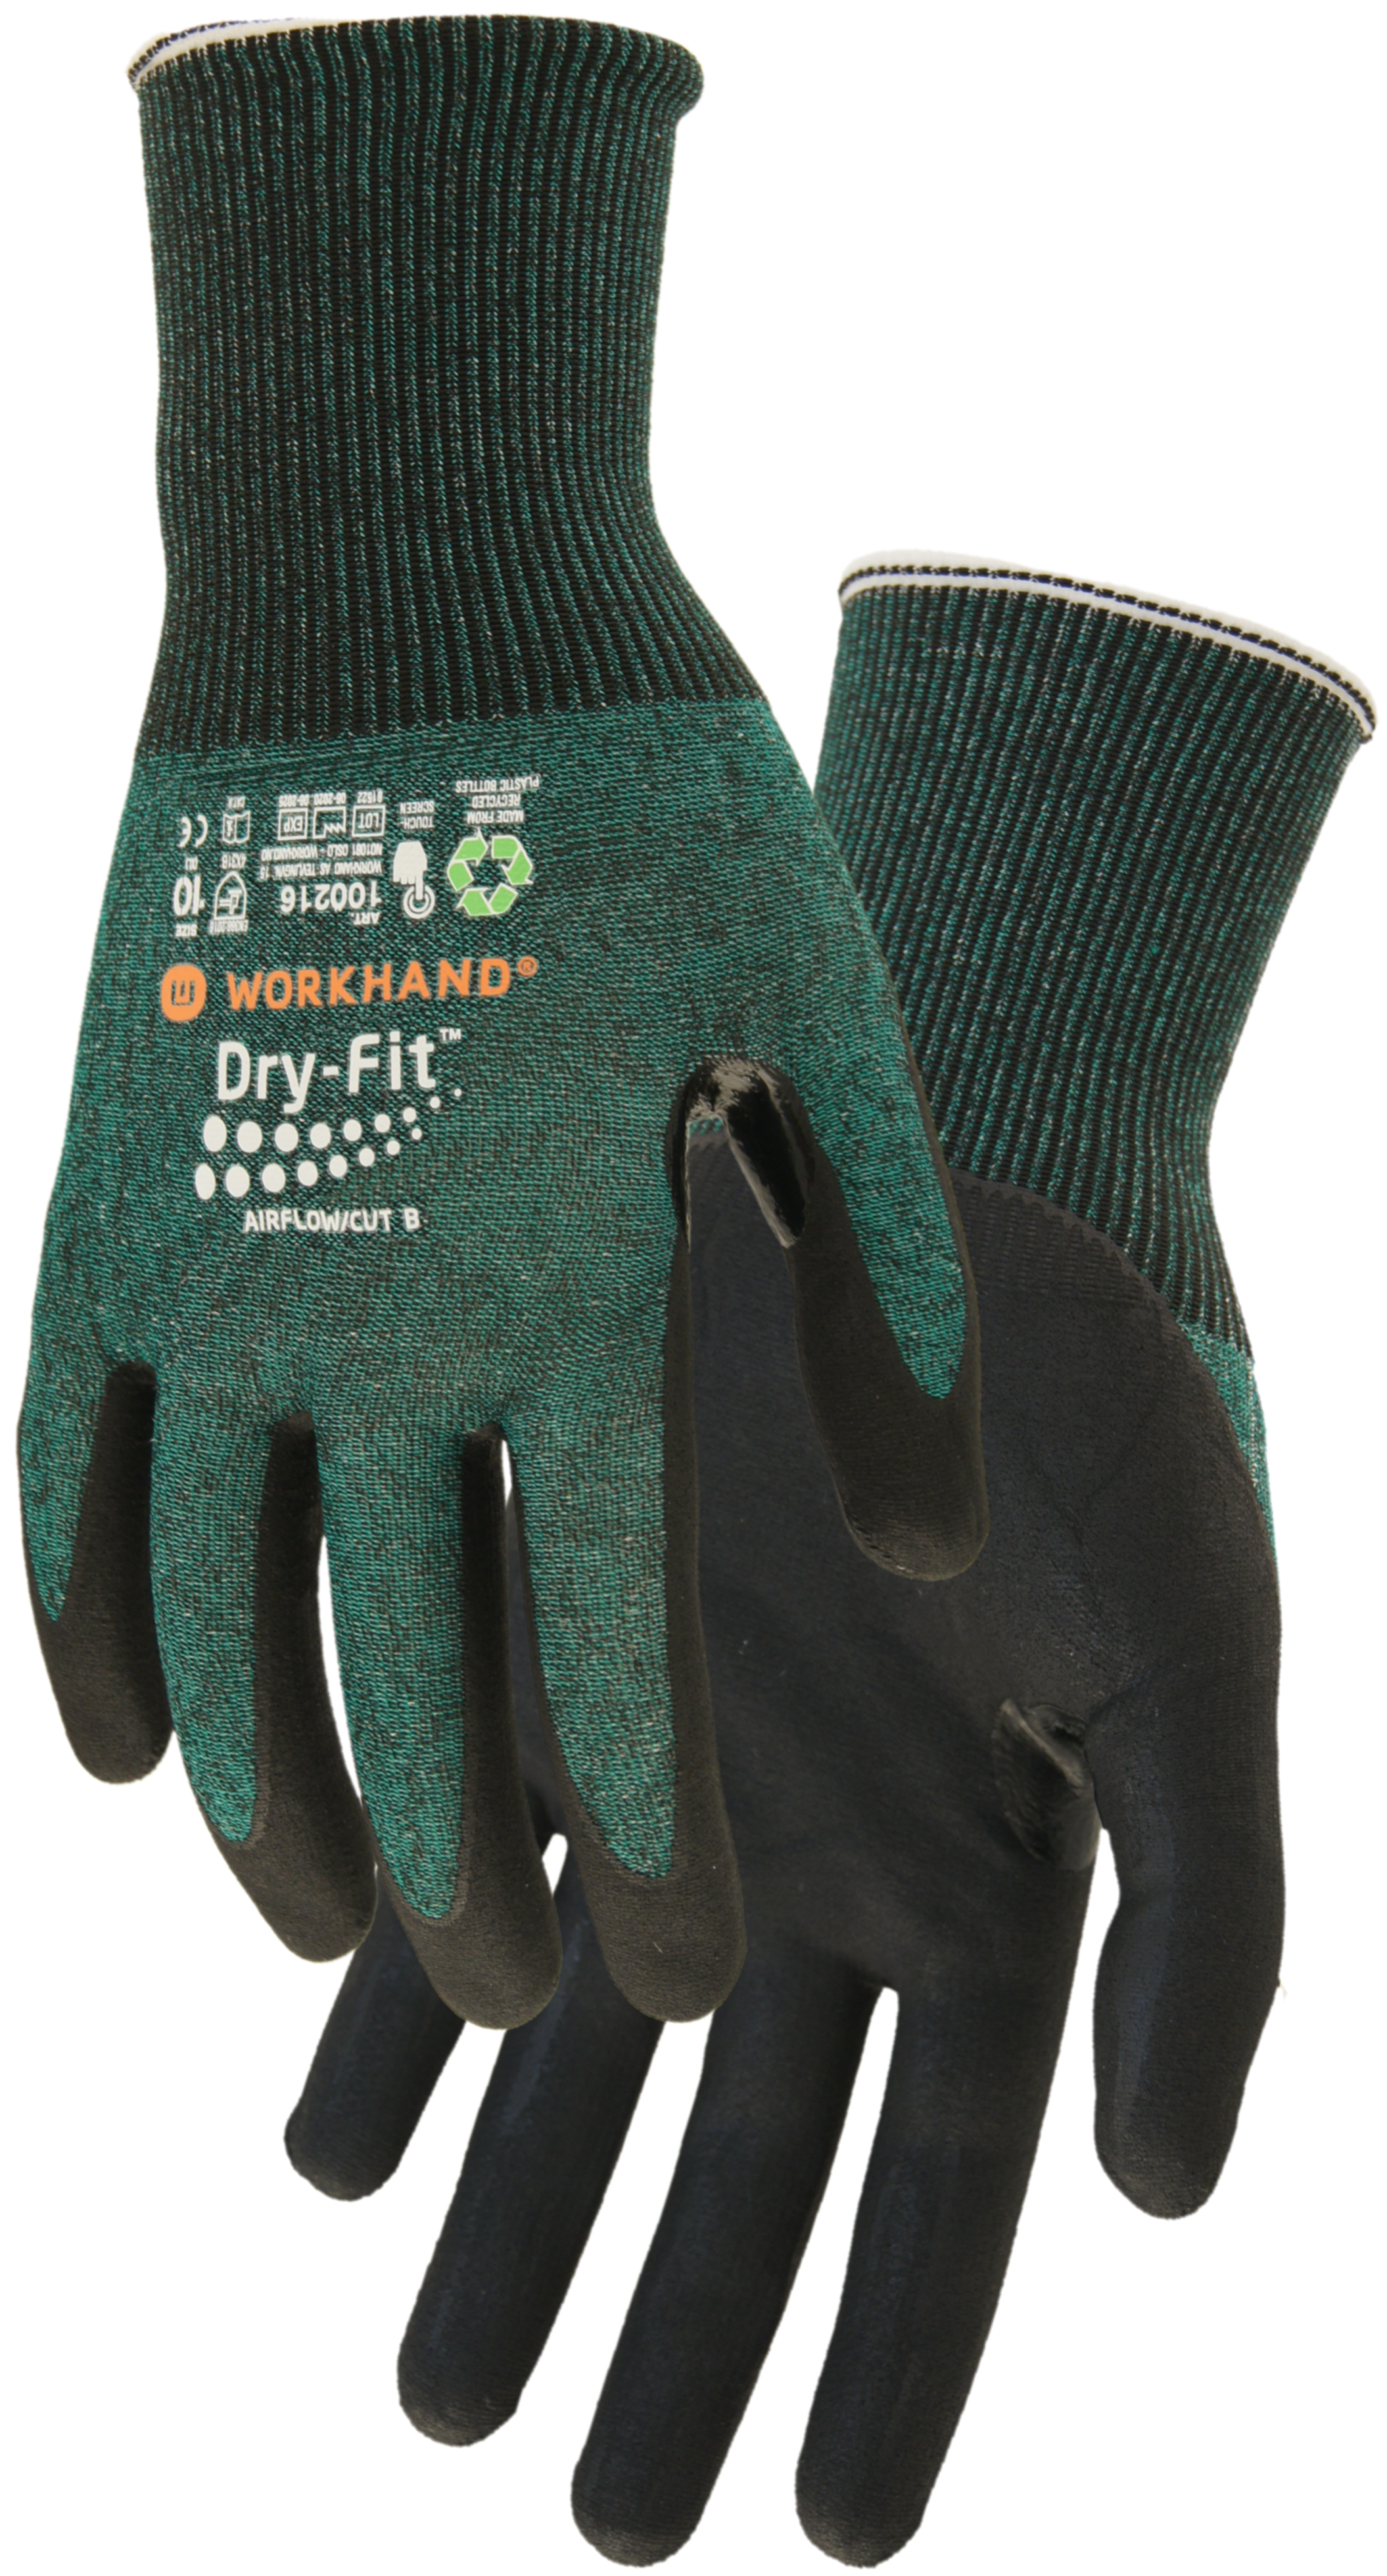 Workhand® Dry-Fit Airflow/Cut-B (608971)